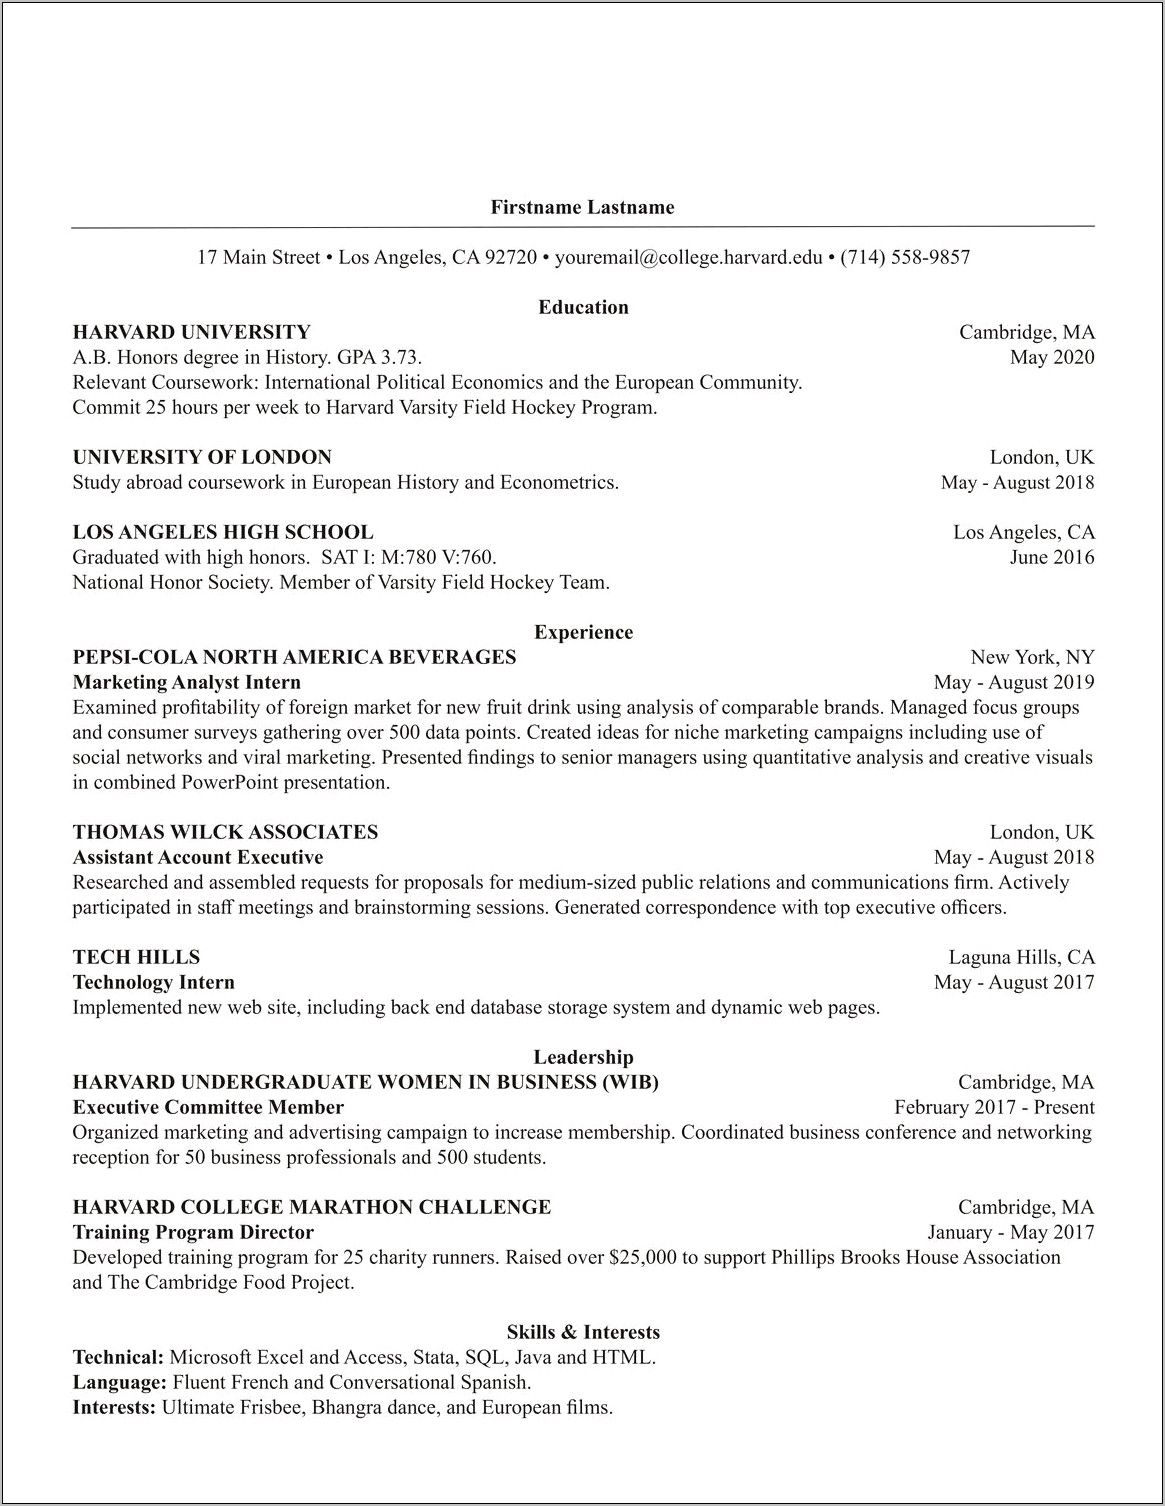 Resume Cover Letter Examples Harvard